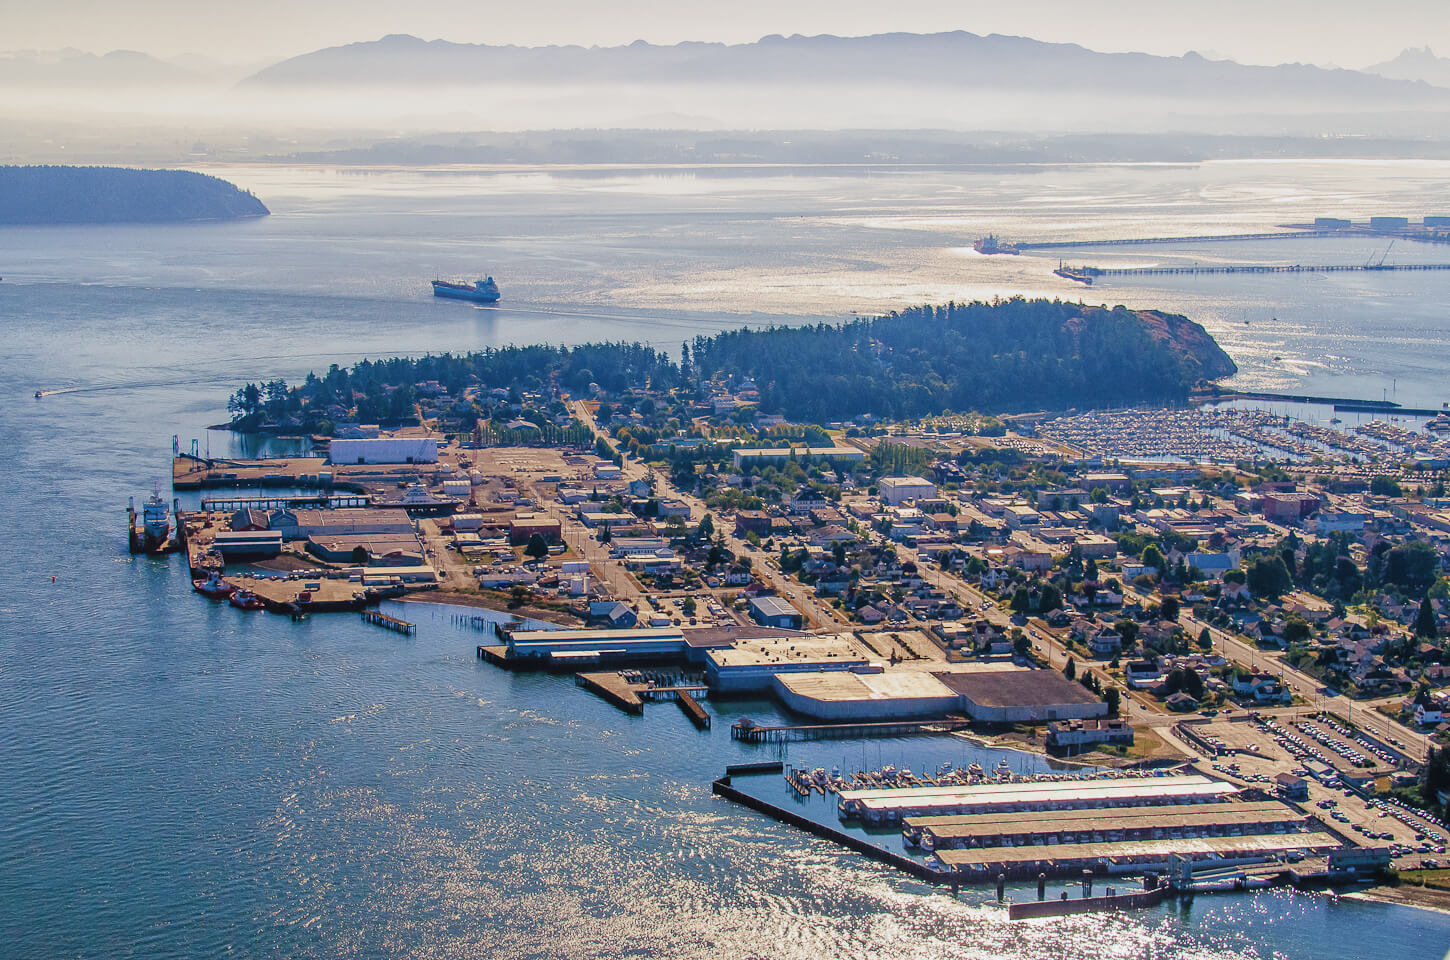 A new tsunami strategy launched for the Port of Anacortes